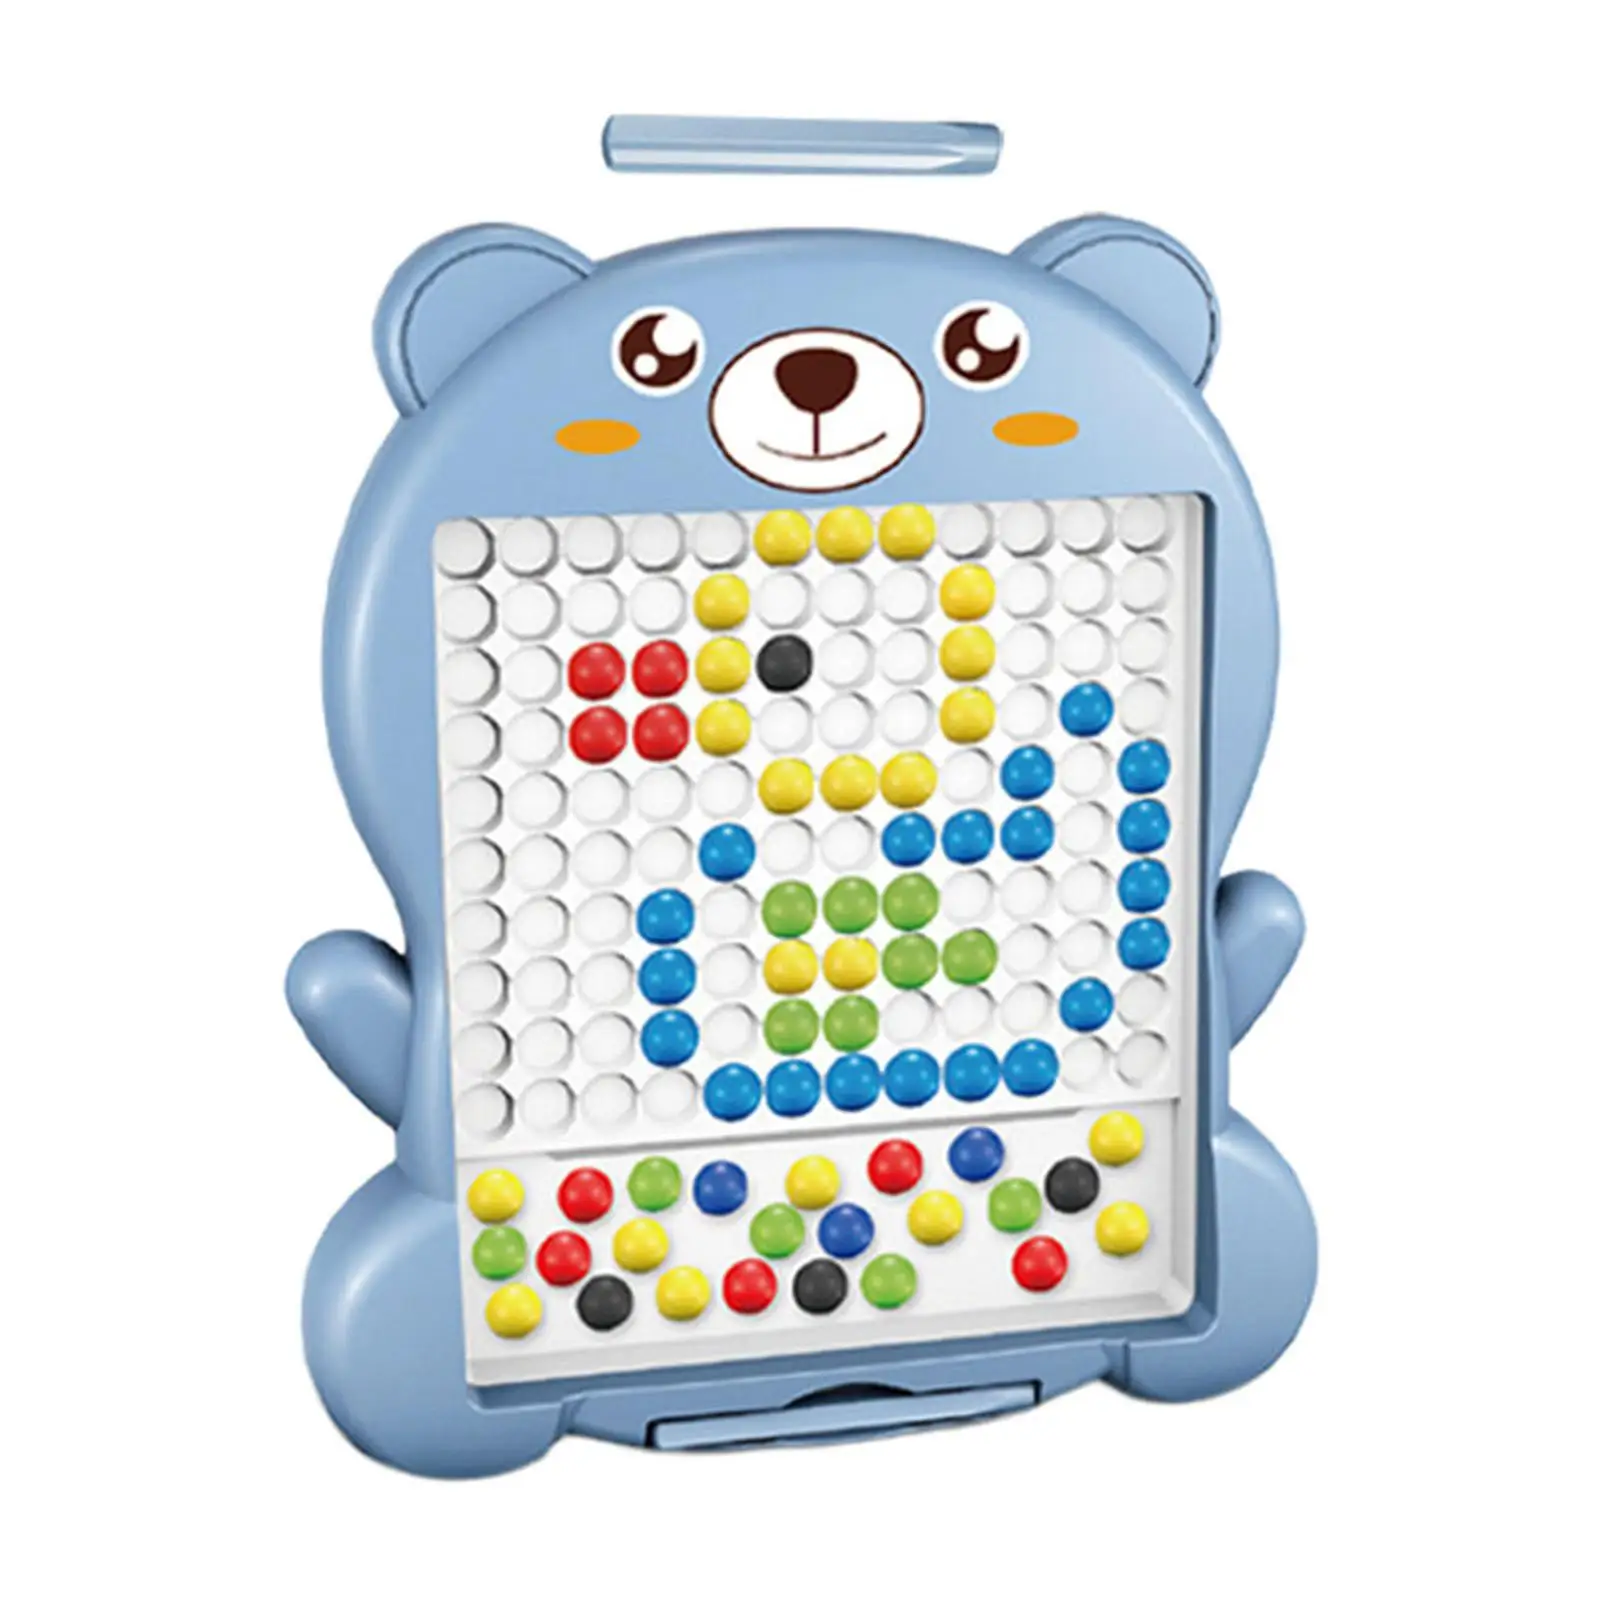 Drawing Board Early Learning Toy Portable Dot Toy for Kids Toddlers Boys Monkey